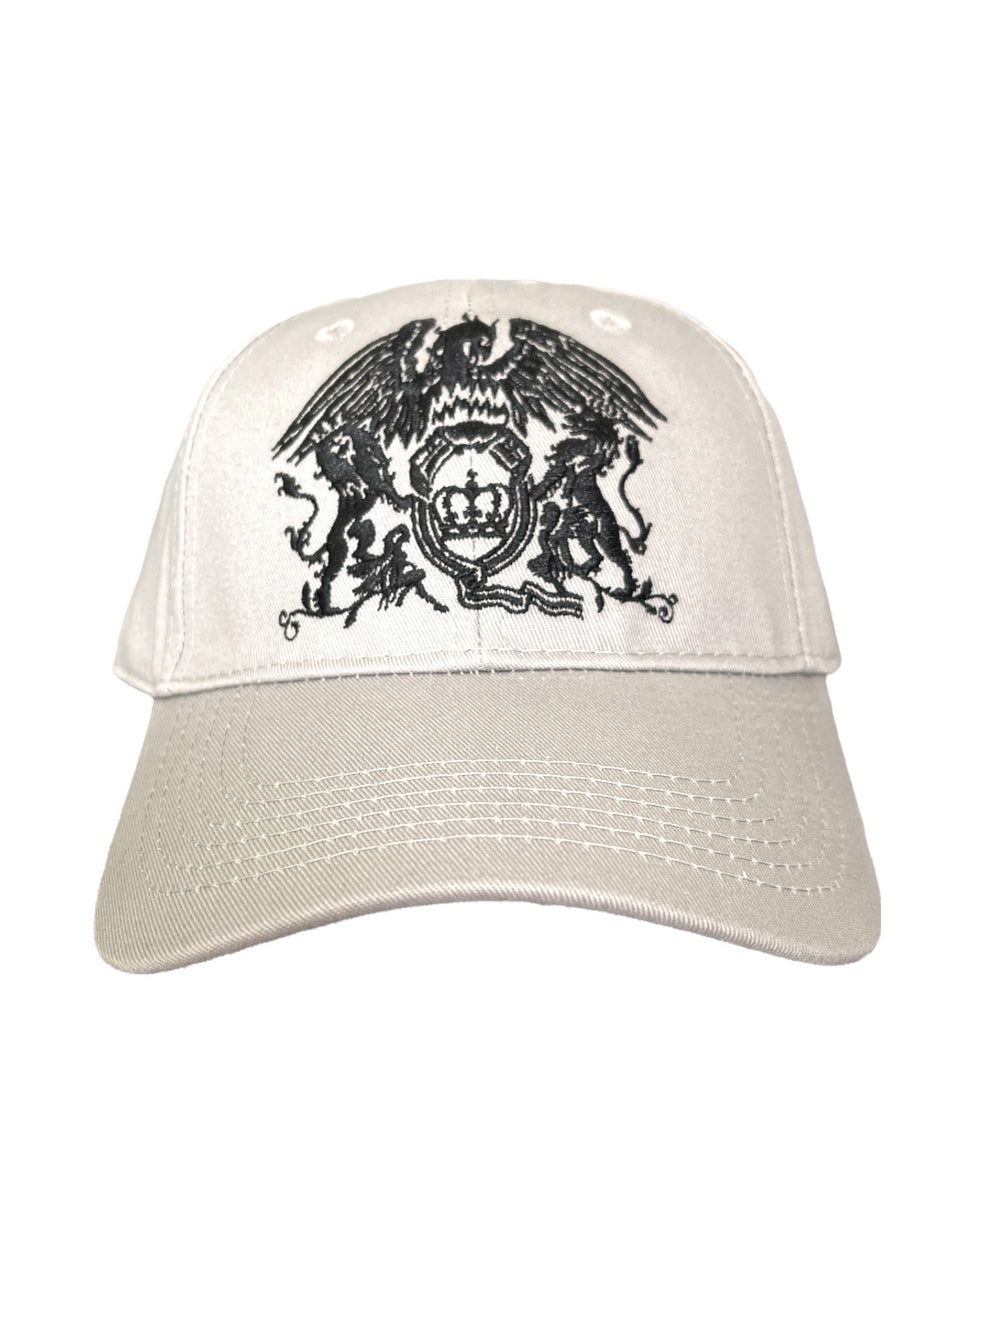 Queen Official Peak Cap Crest & Name Embroidery Adjustable New GREY